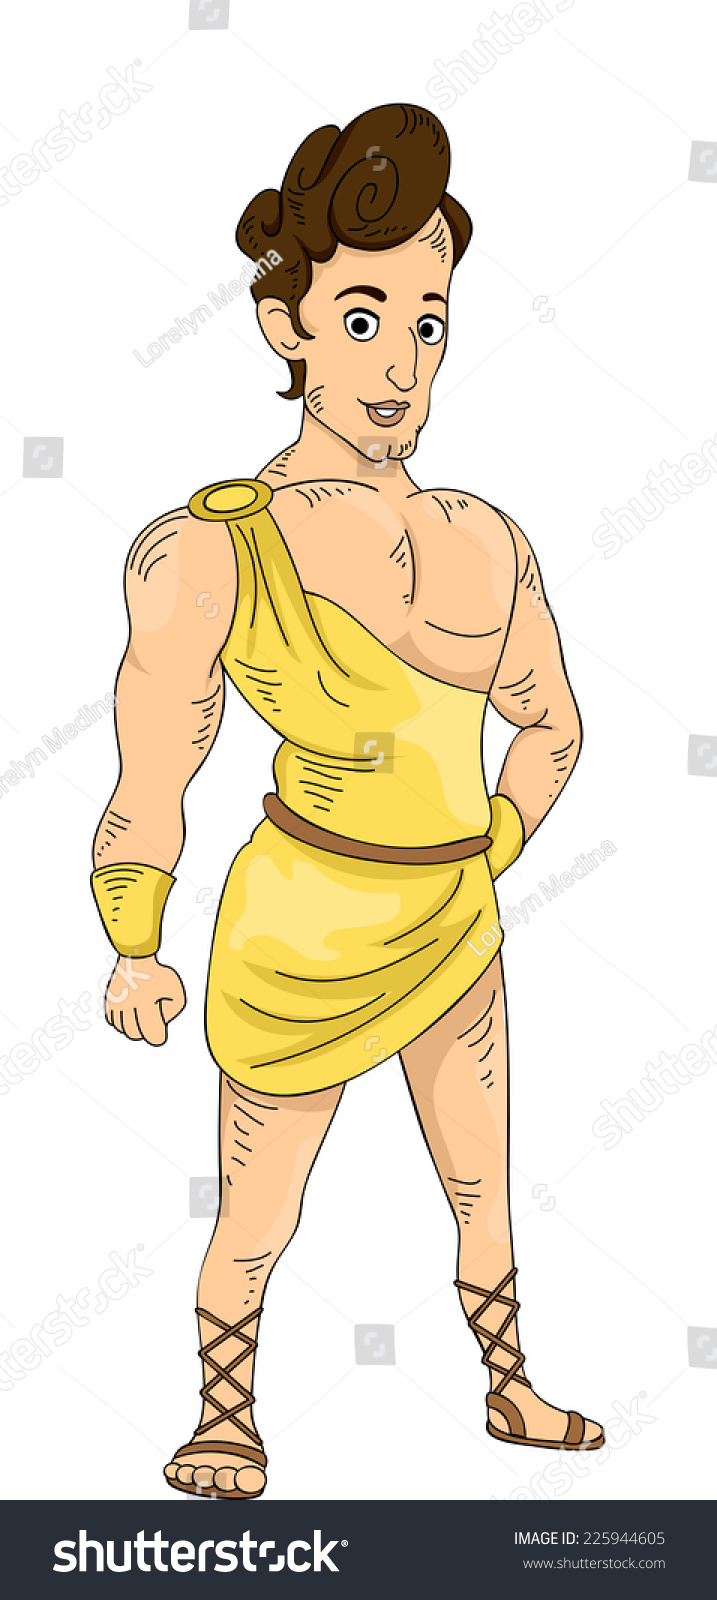 Illustration Featuring Young Muscular Greek God Stock Vector 225944605 ...